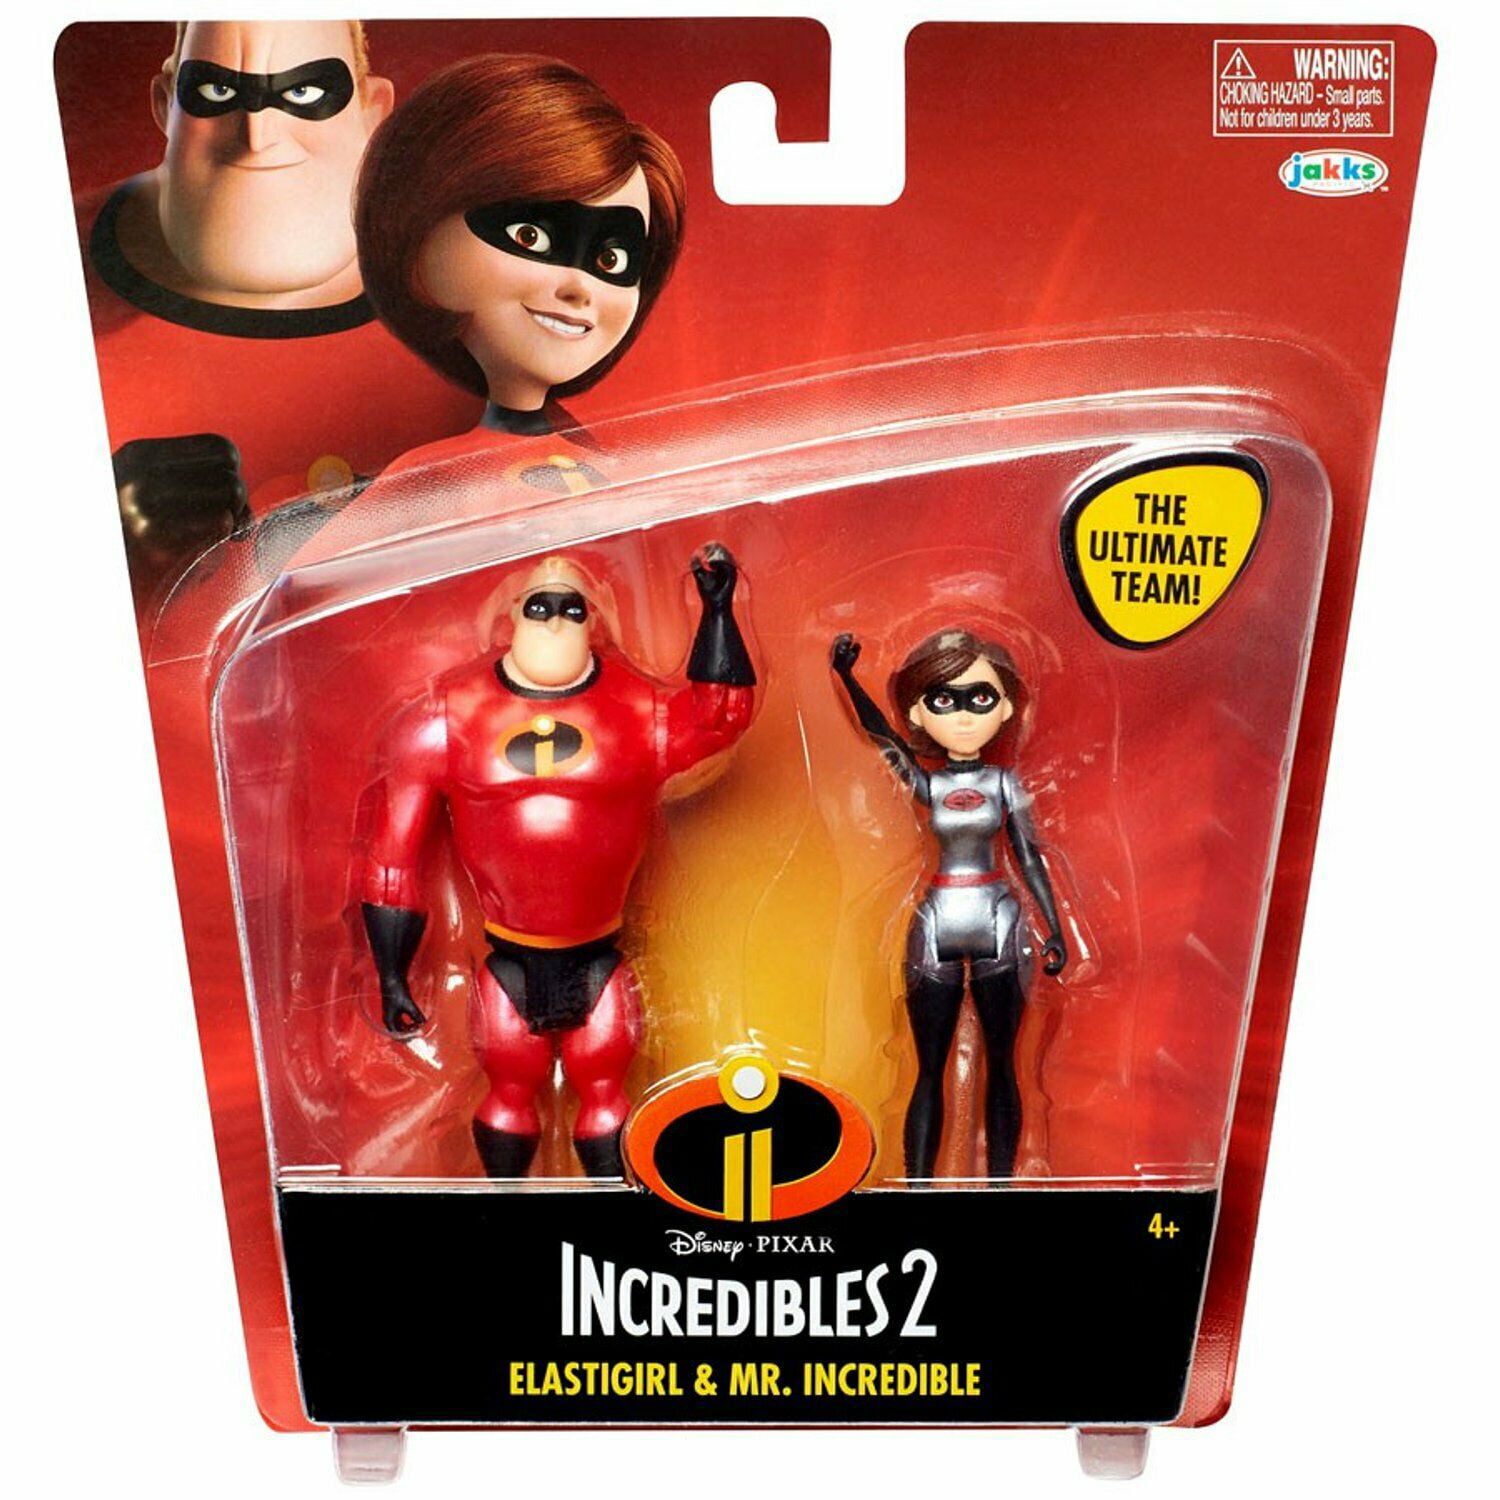 Disney The Incredibles 2 Pack of 3 x Mash'ems Blind Bad toys Series 1 NEW